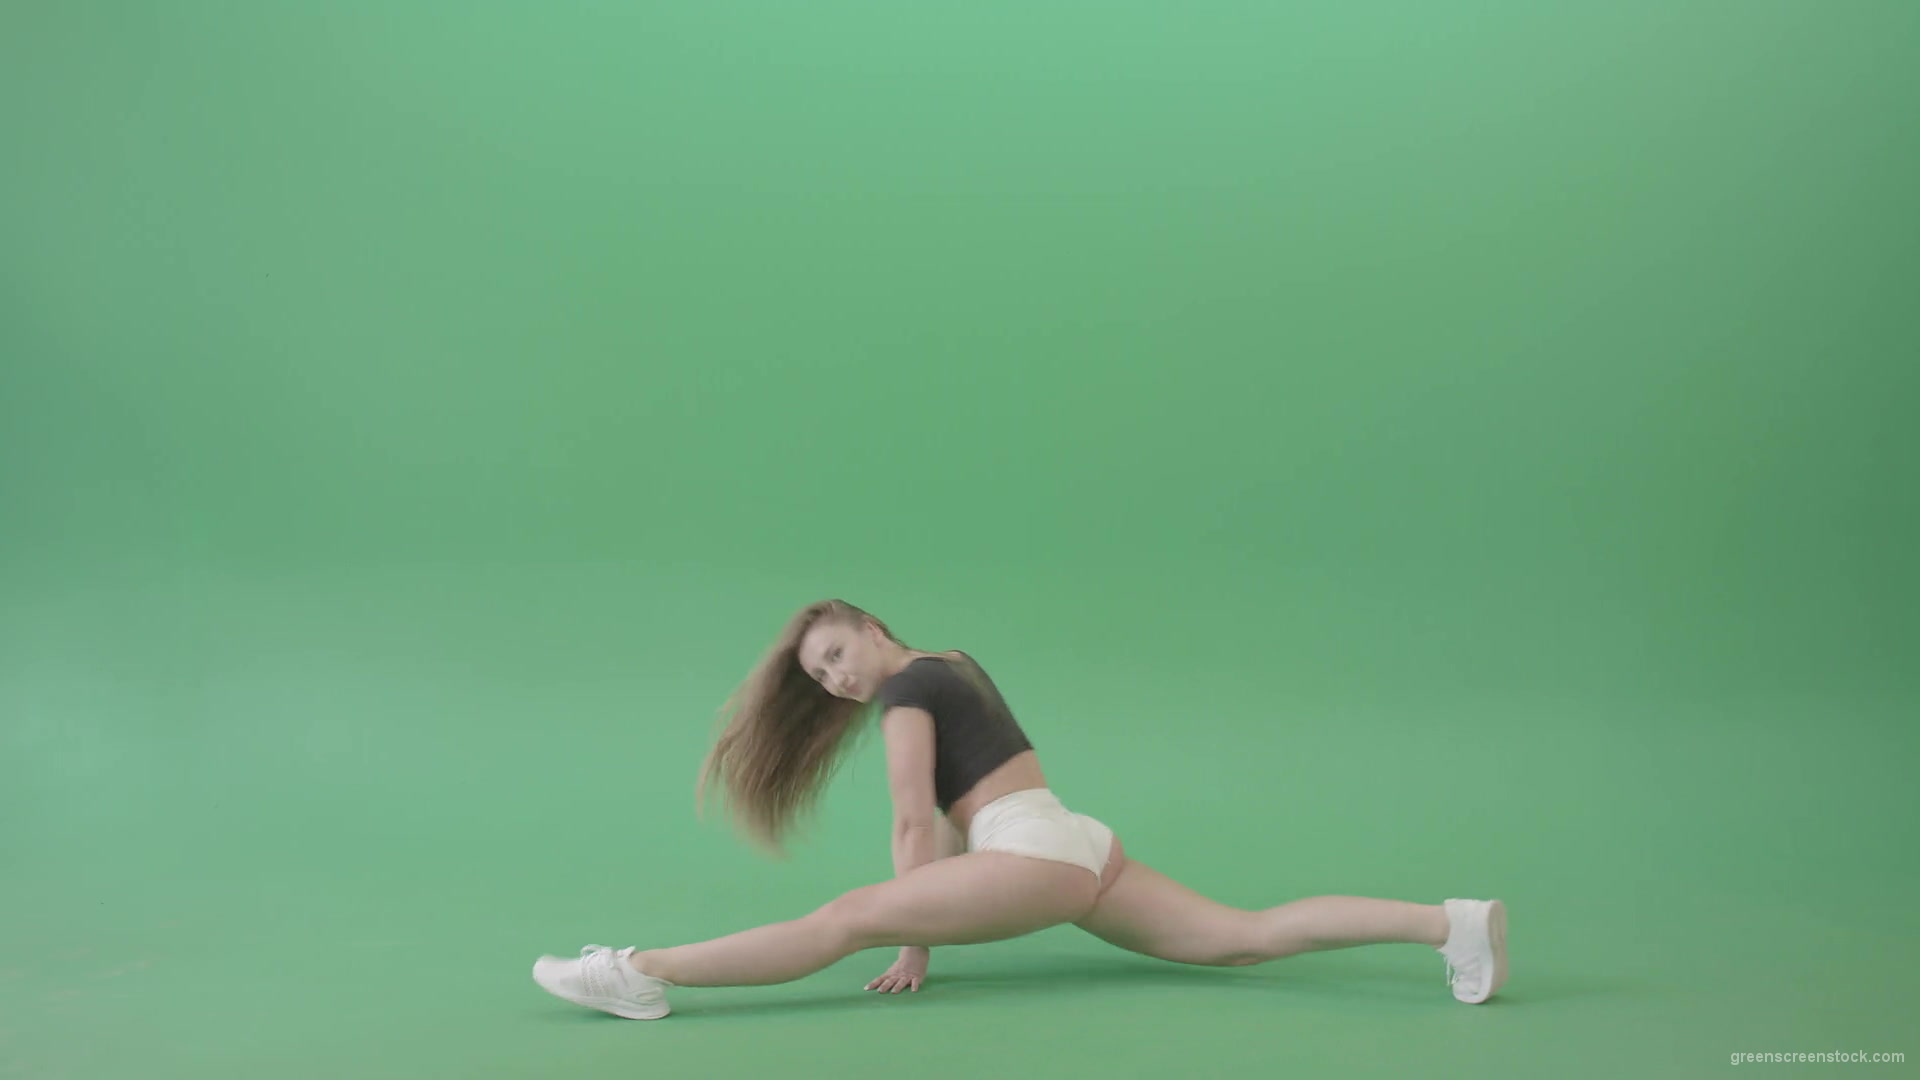 American-girl-twerking-ass-isolated-on-green-background-4k-Video-Footage-1920_007 Green Screen Stock